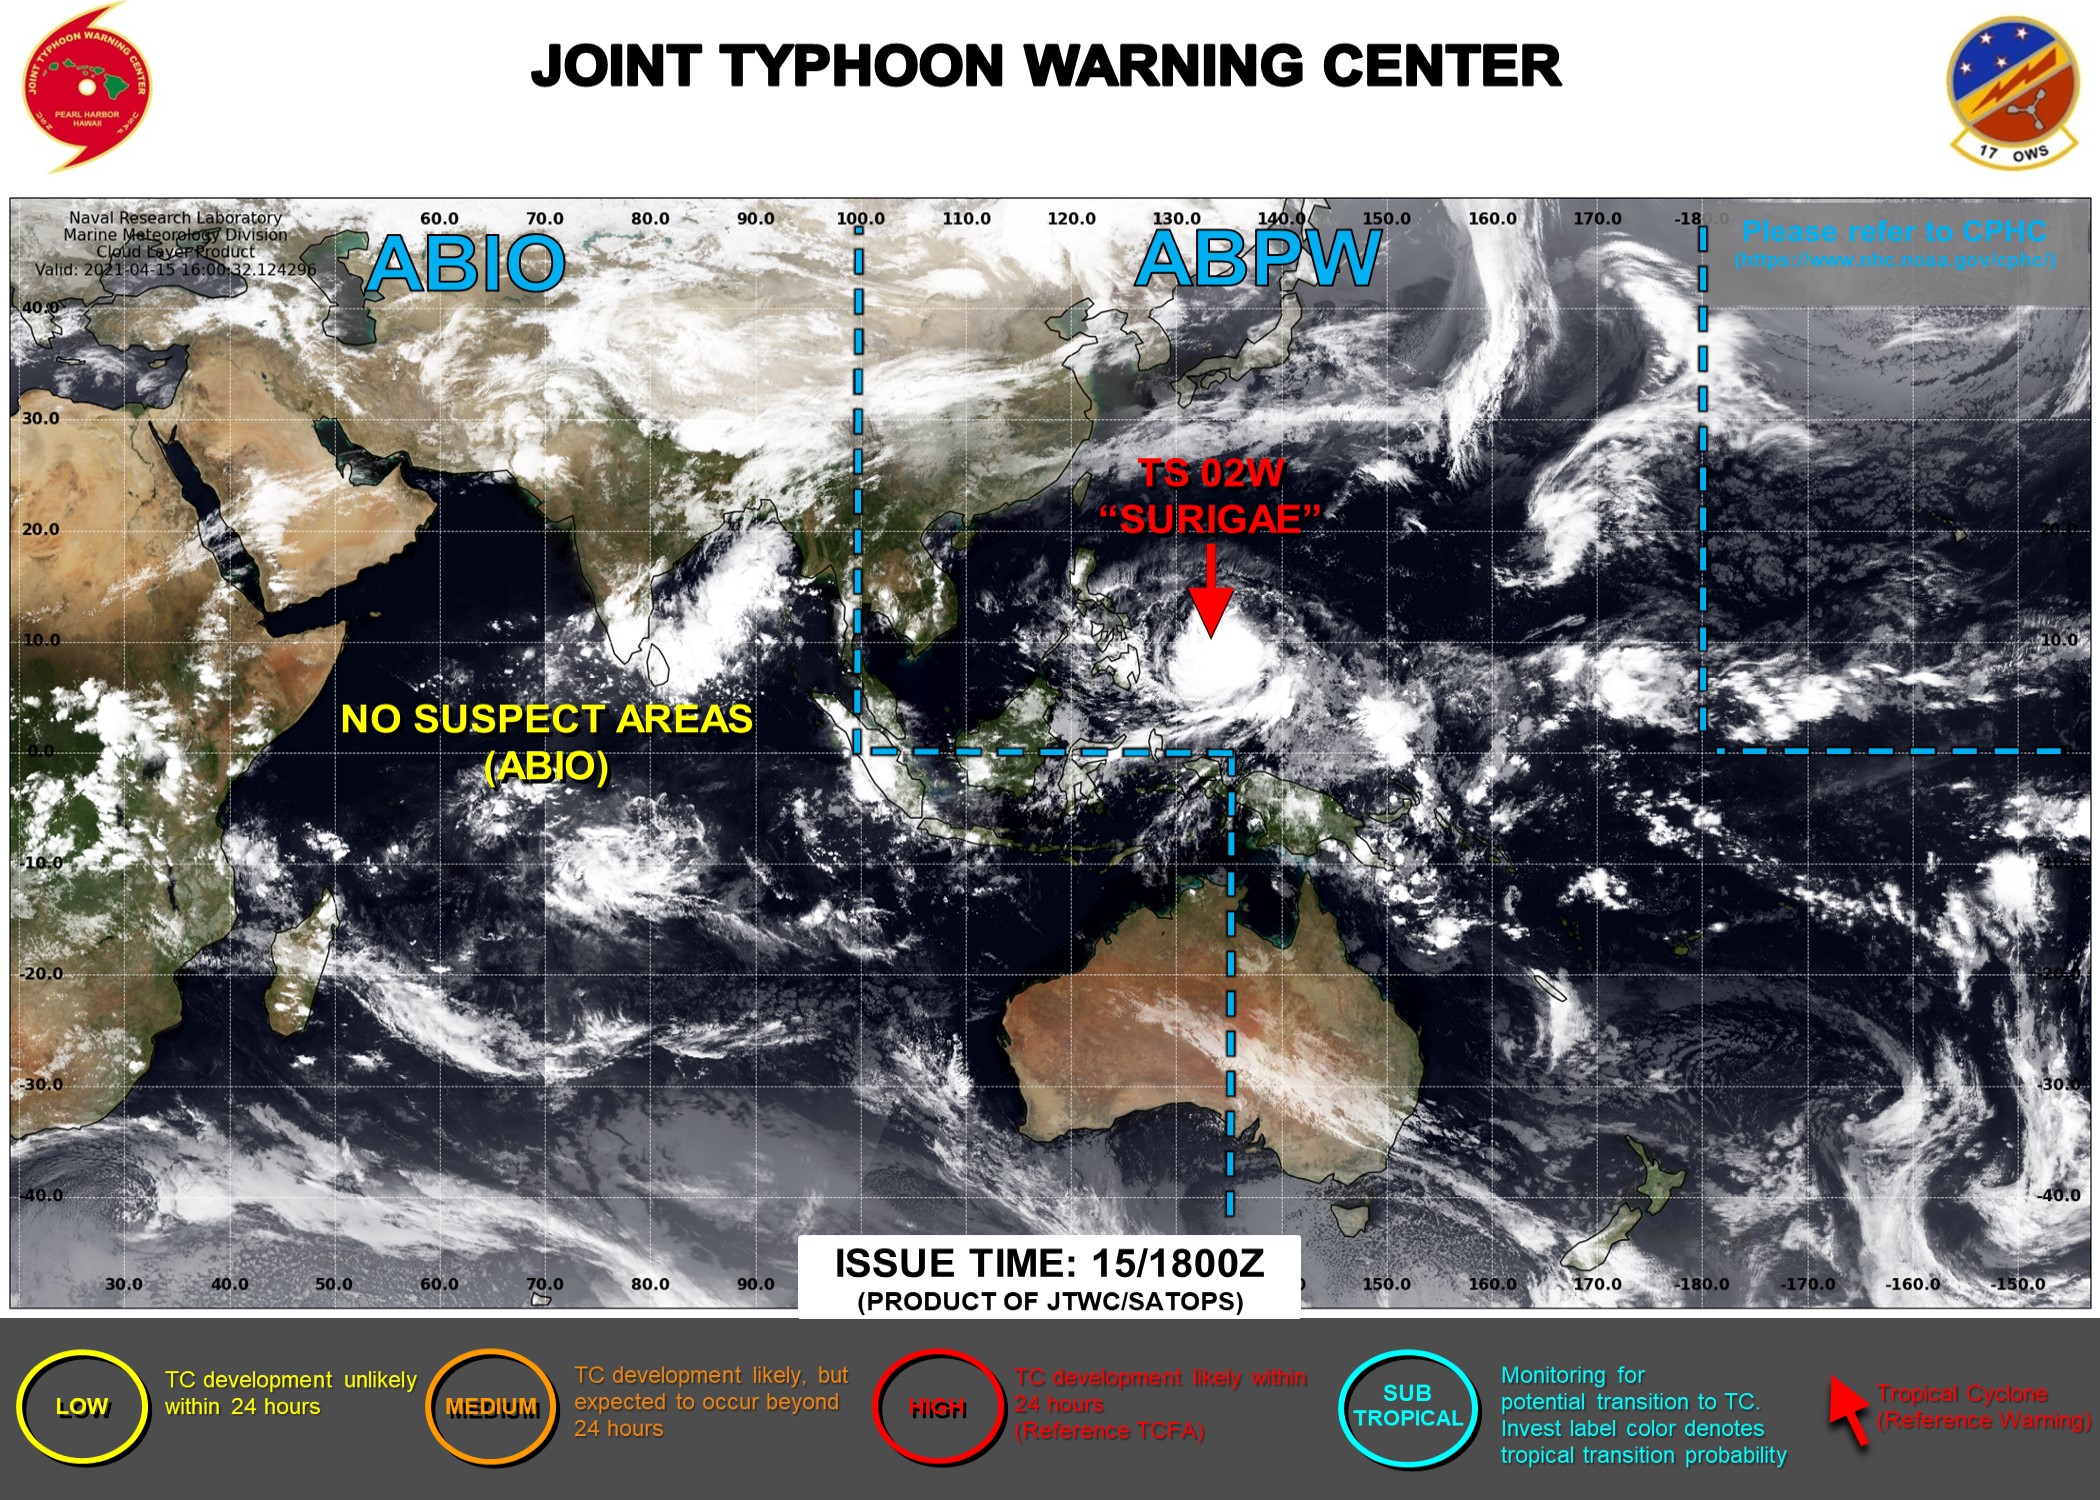 16/03UTC. THE JTWC IS ISSUING 6HOURLY WARNINGS ON 02W(SURIGAE) AND 3HOURLY SATELIITE BULLETINS.